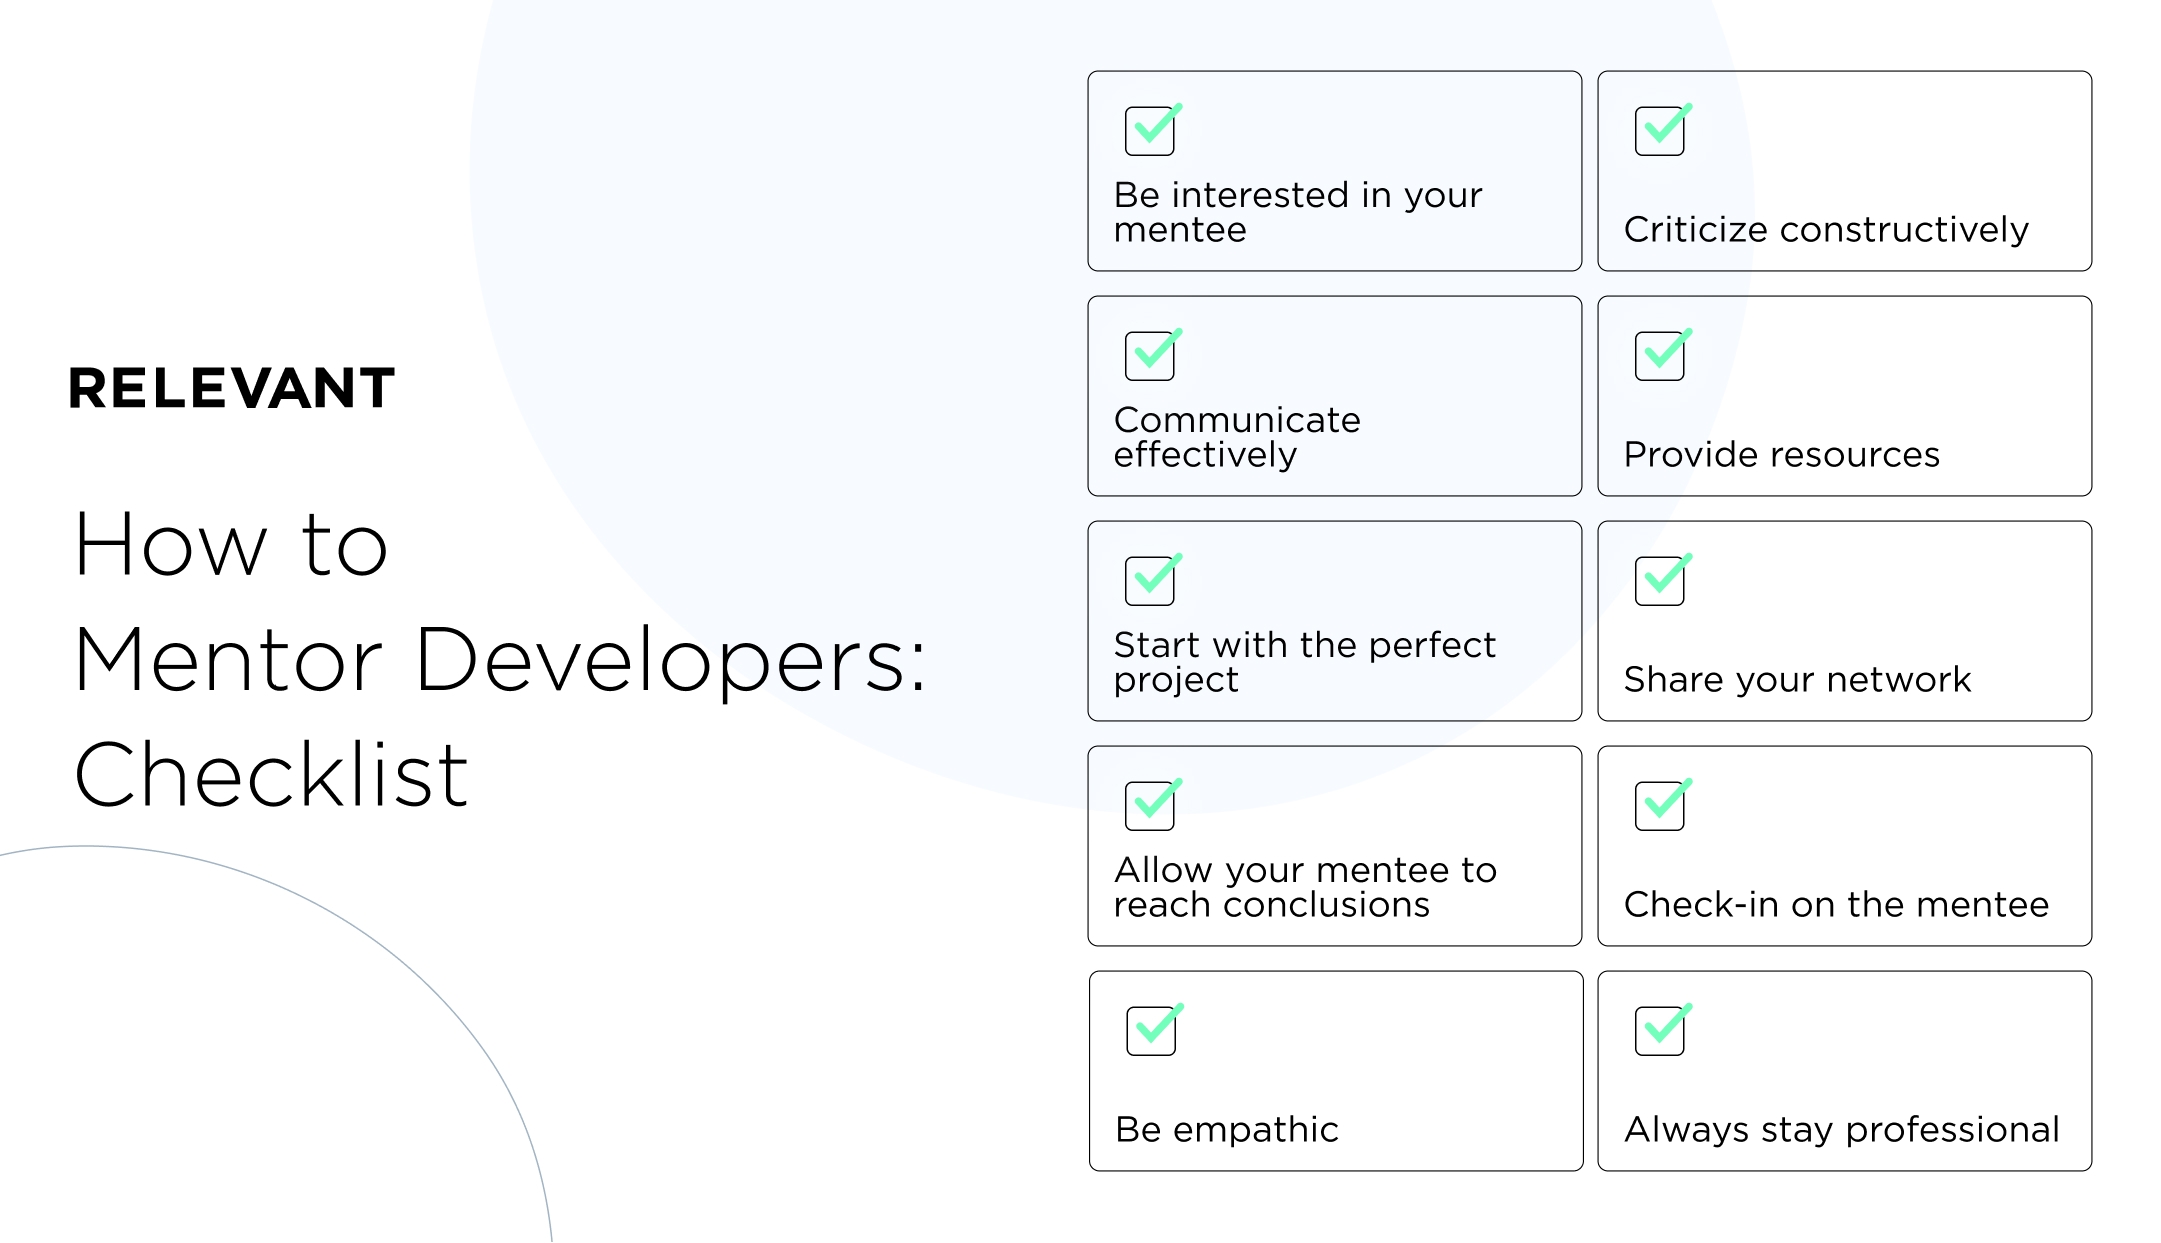 How to Mentor Developers: Checklist